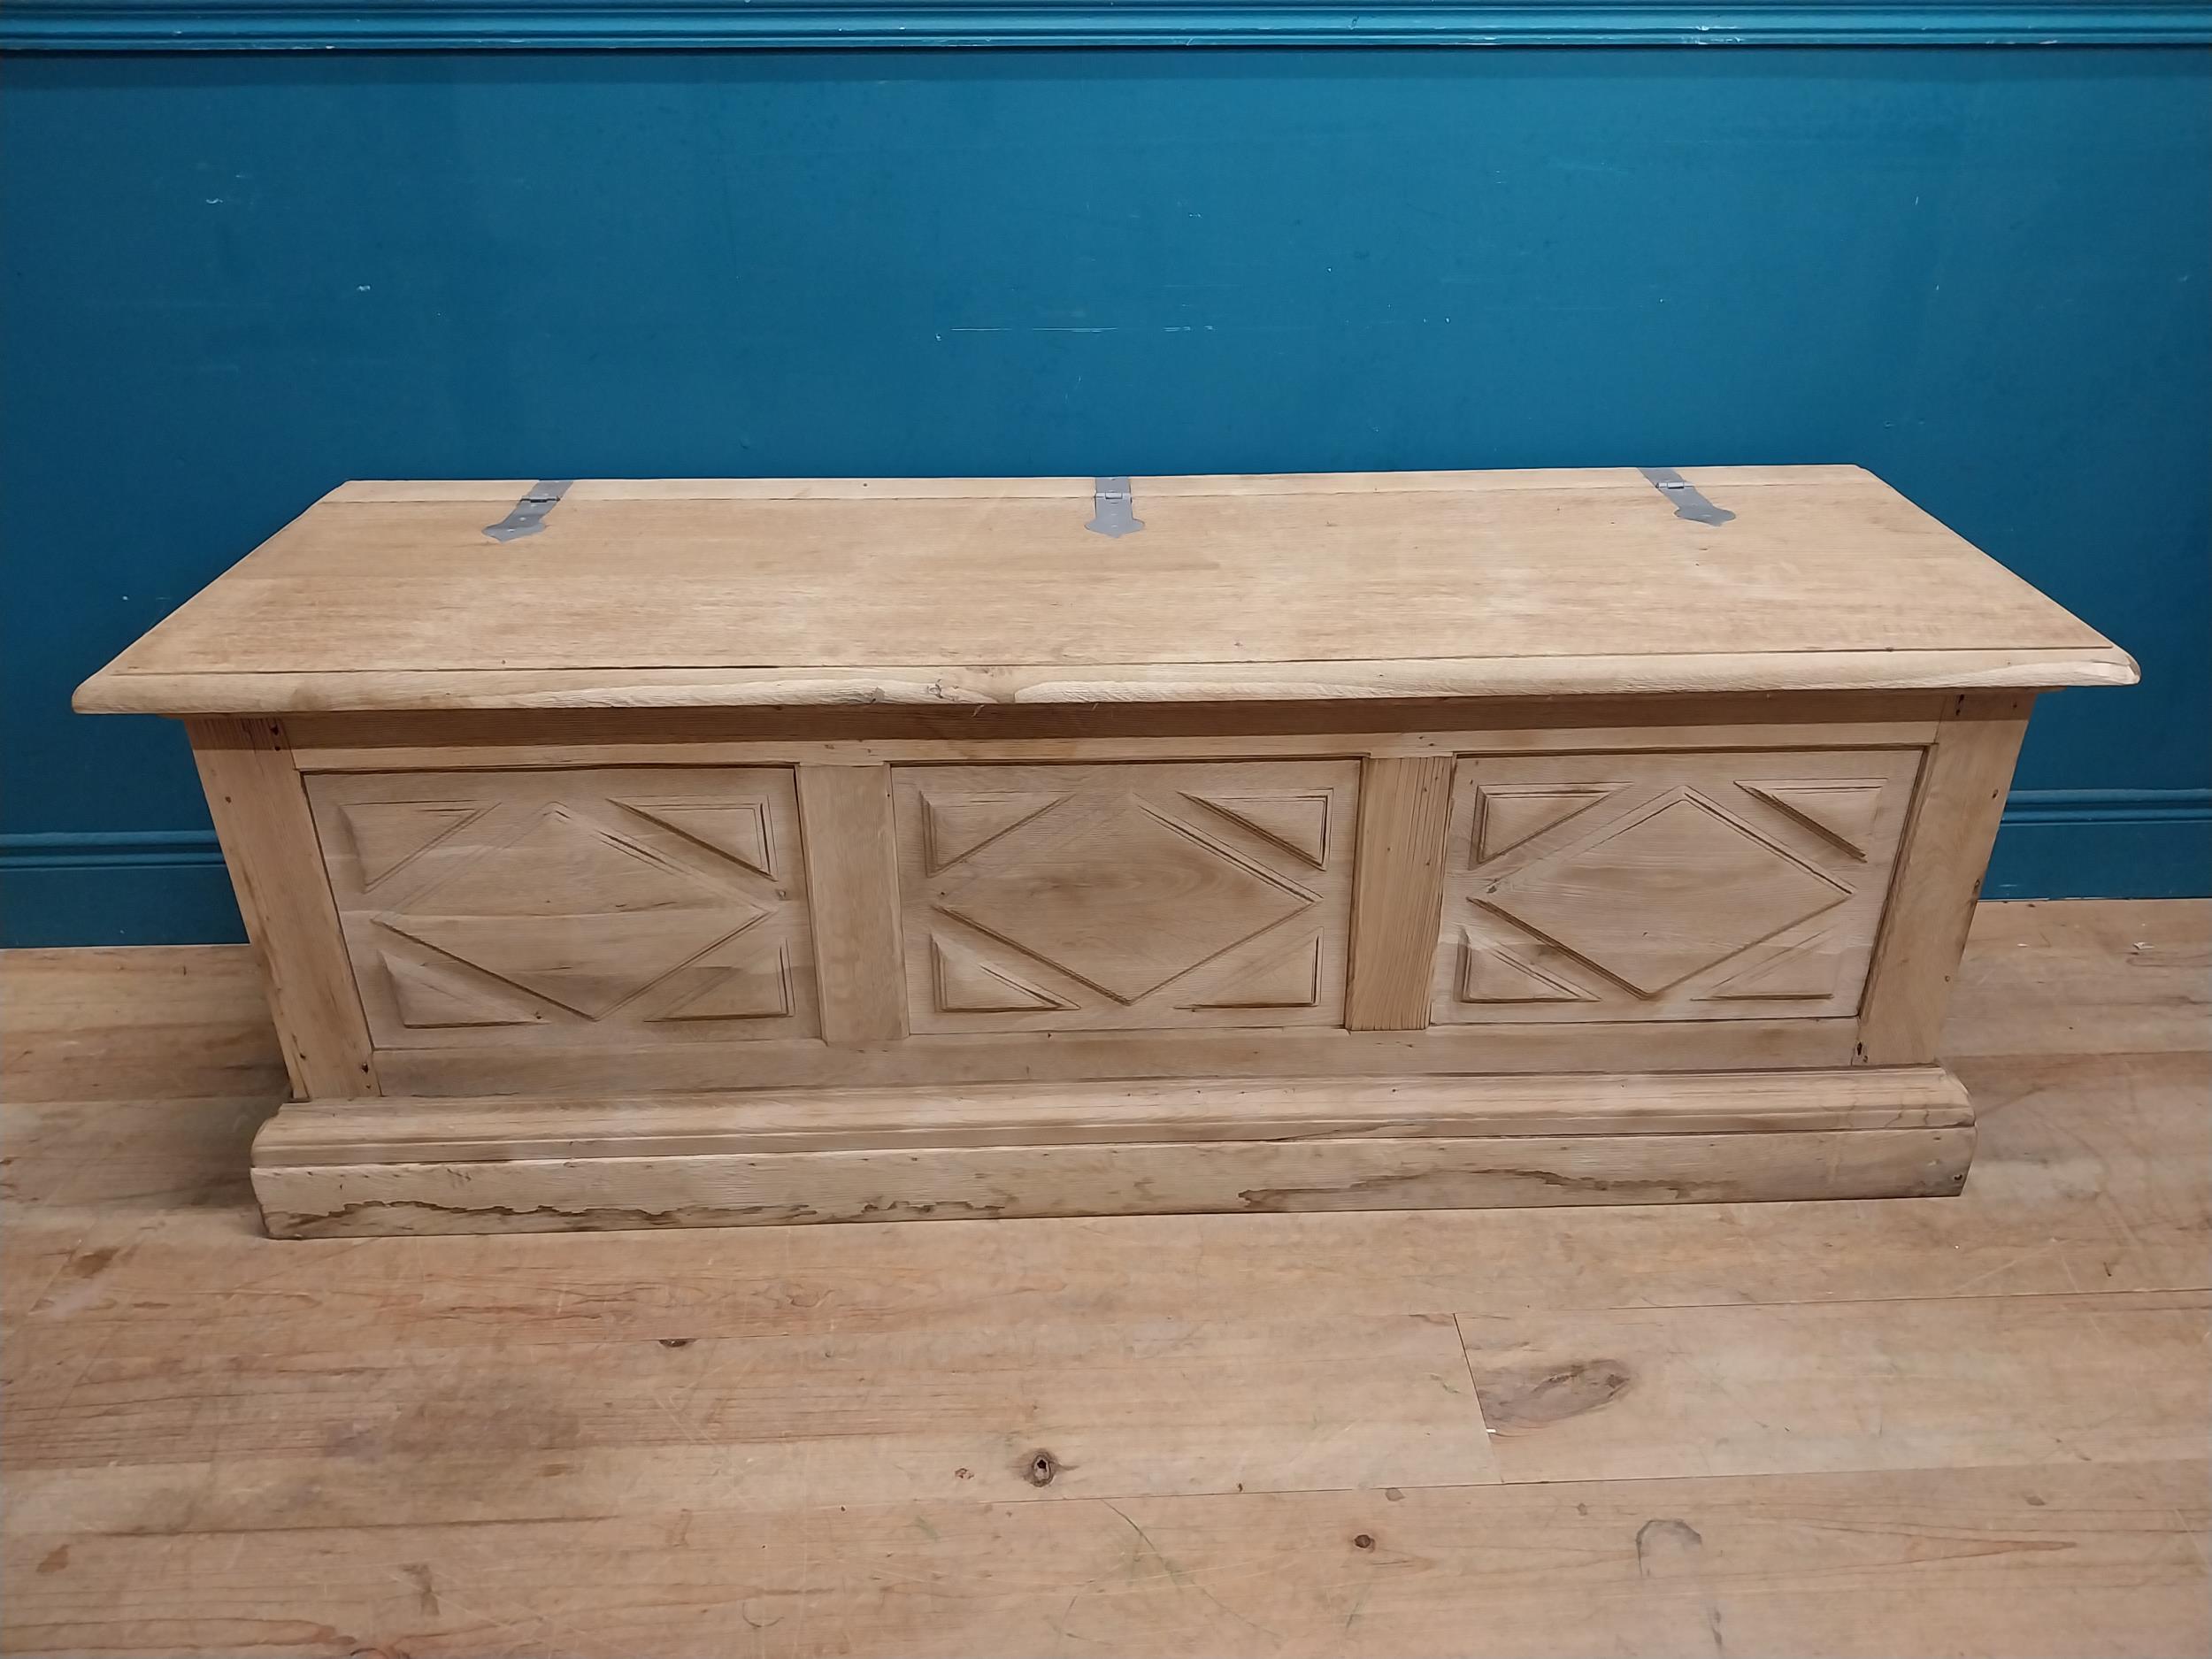 Early 20th C. bleached oak blanket box with metal mounts. {57 cm H x 162 cm W x 52 cm D}. - Image 3 of 6